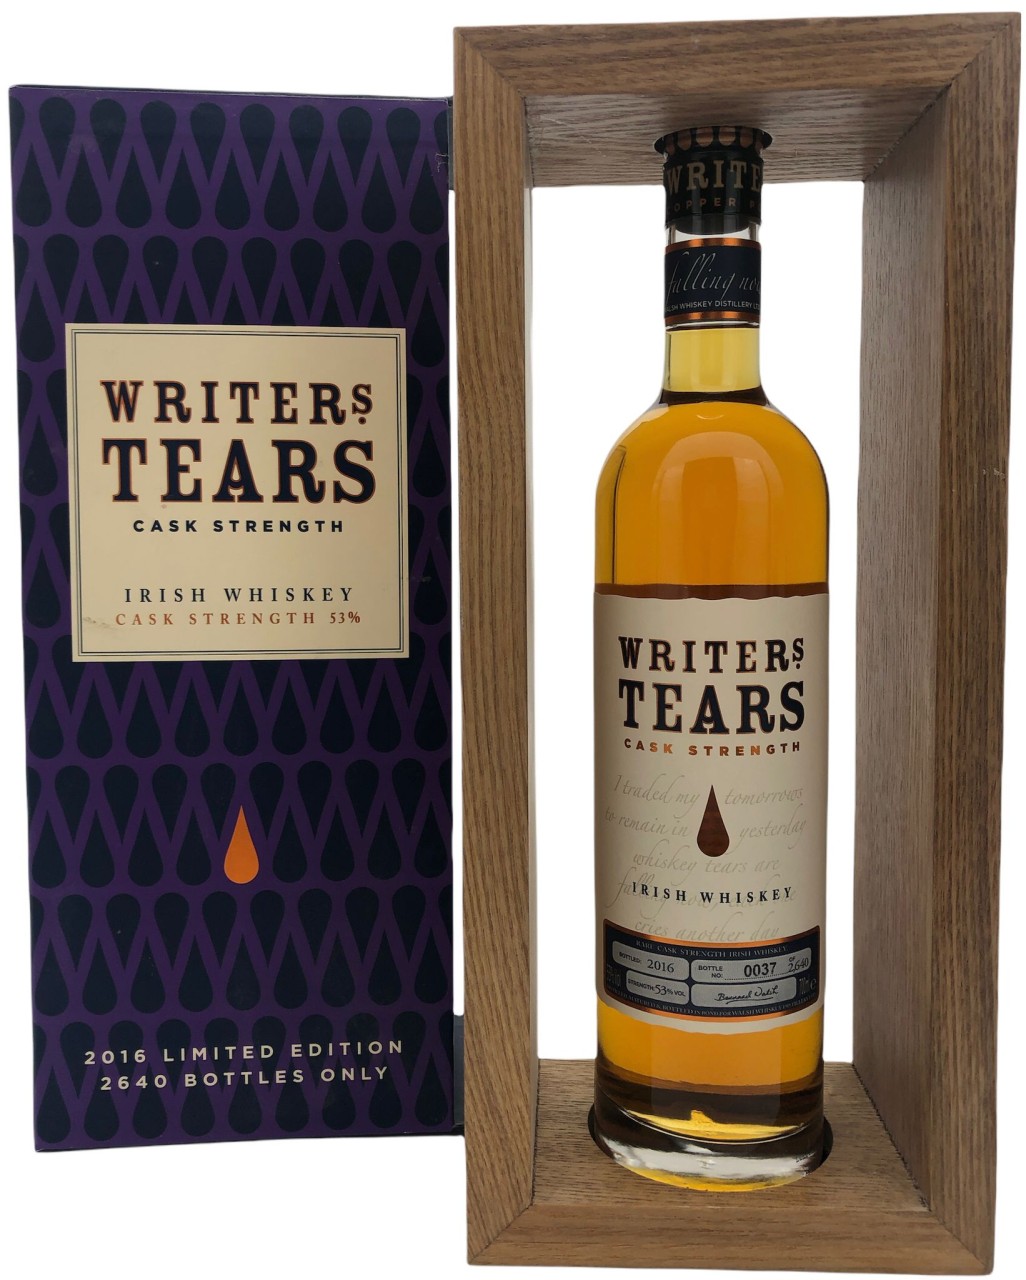 Writer´s Tears Cask Strength 2016 Limited Edition 2640 Bottles only 53%vol.